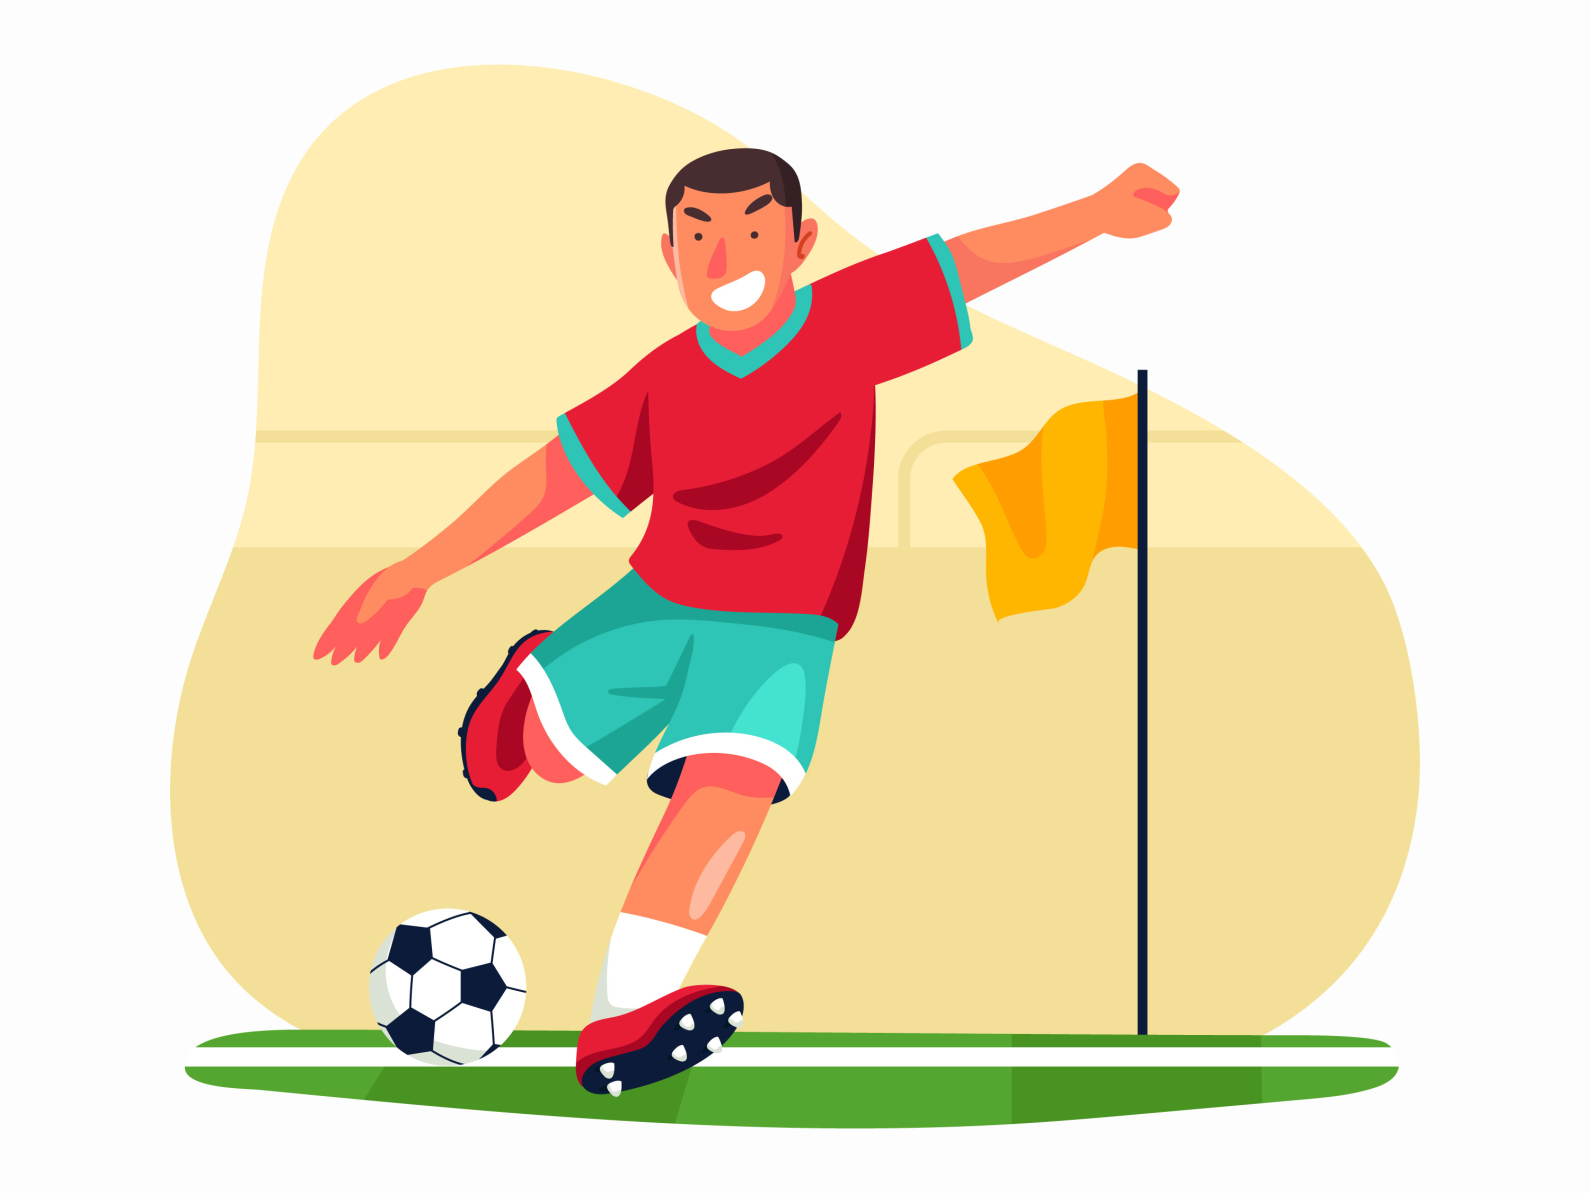 Soccer Player Illustration by Unblast on Dribbble